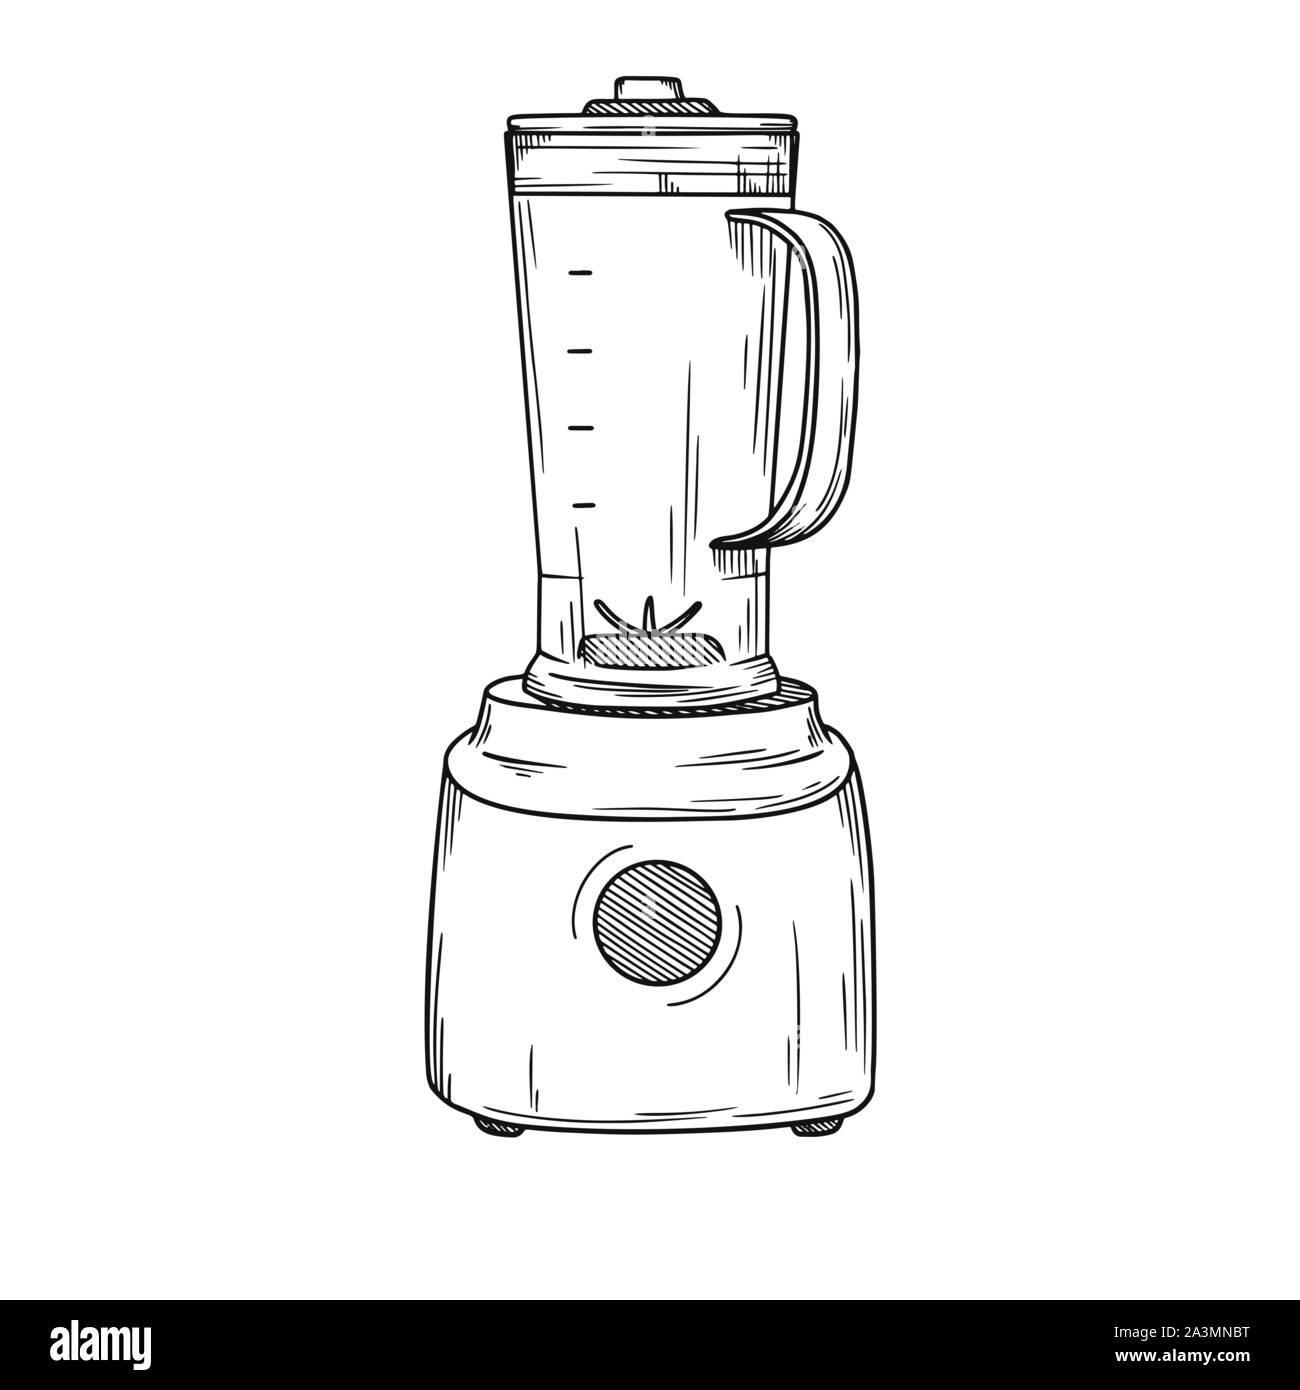 Blender on a white background. Vector illustration in sketch style. Stock Vector